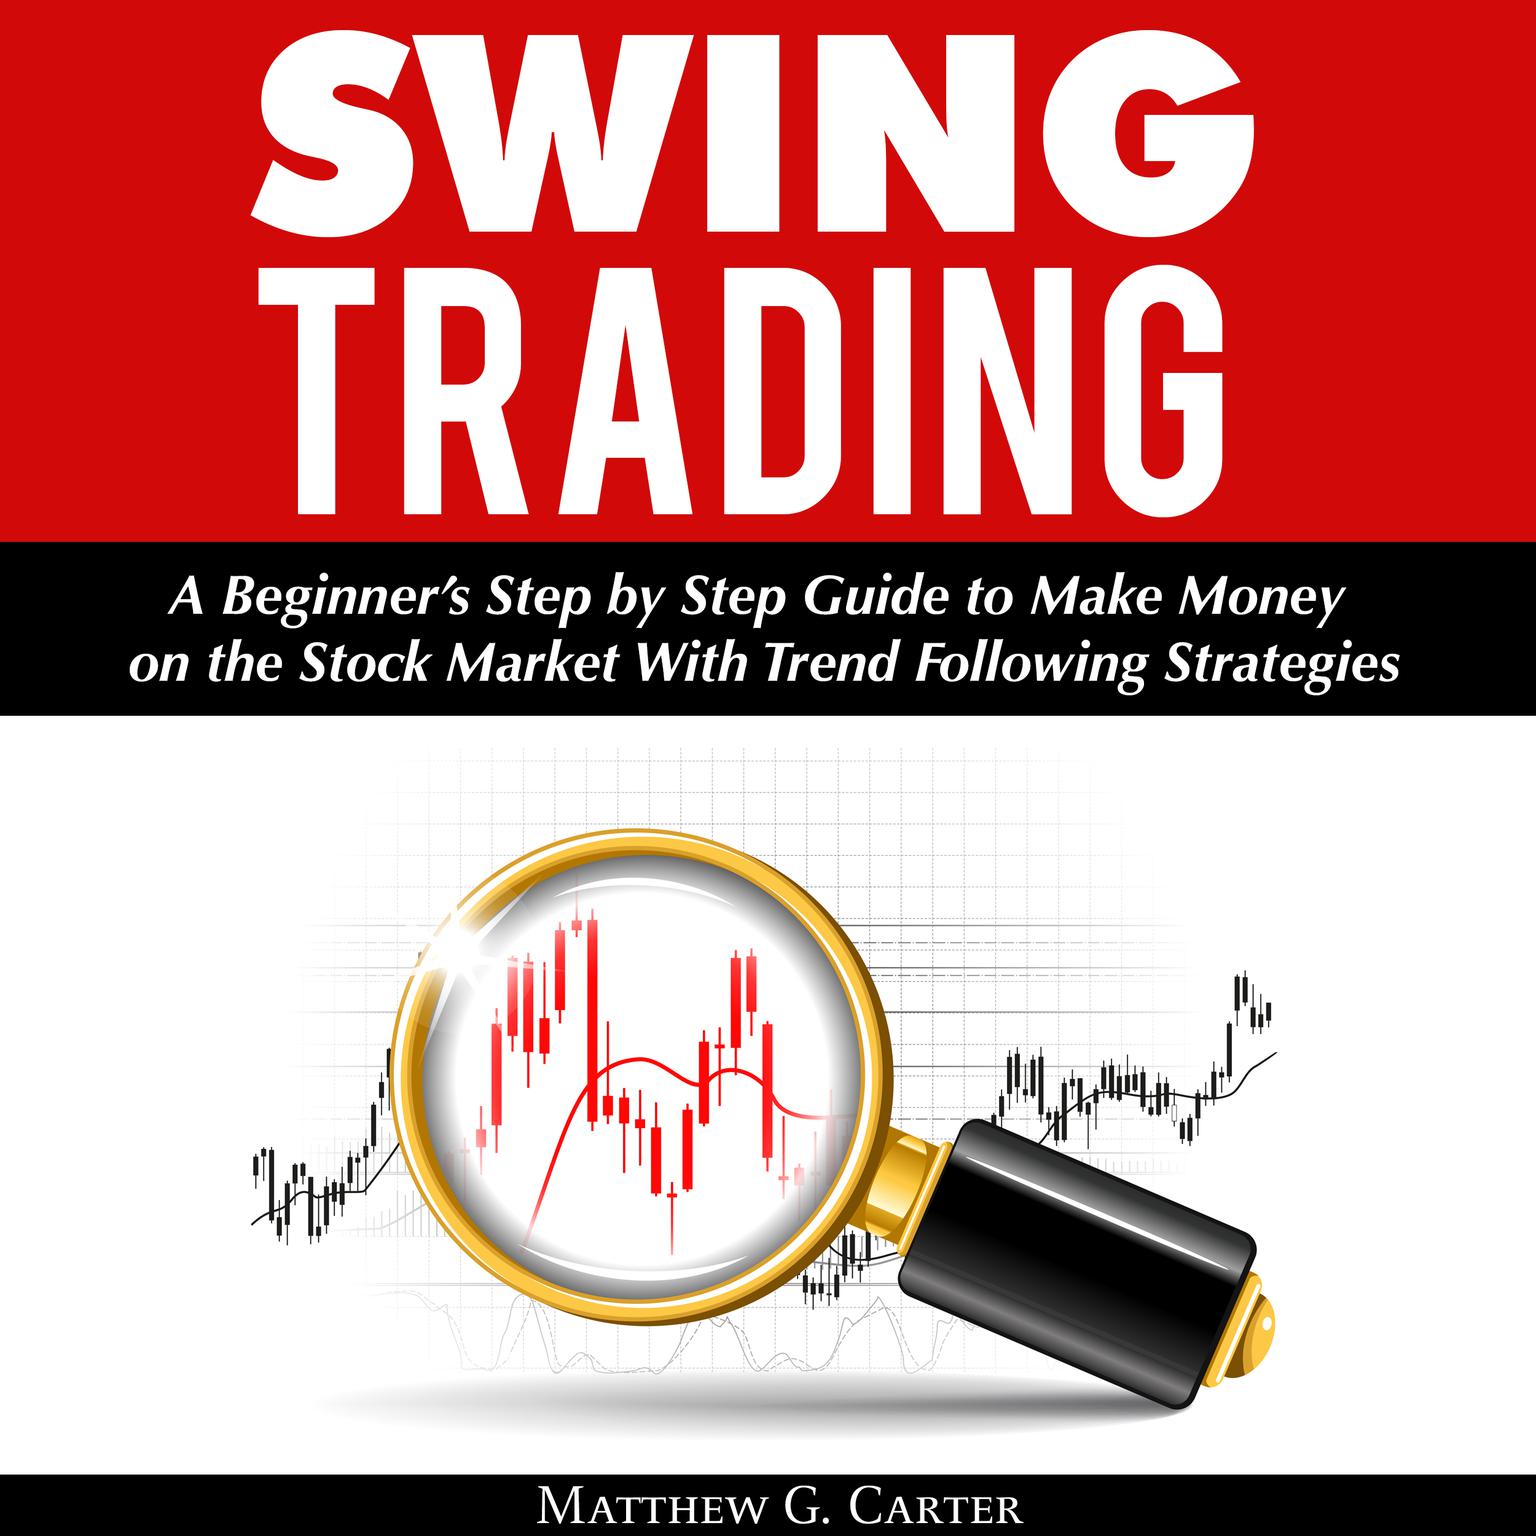 Swing Trading: A Beginner’s Step by Step Guide to Make Money on the Stock Market With Trend Following Strategies Audiobook, by Matthew G. Carter